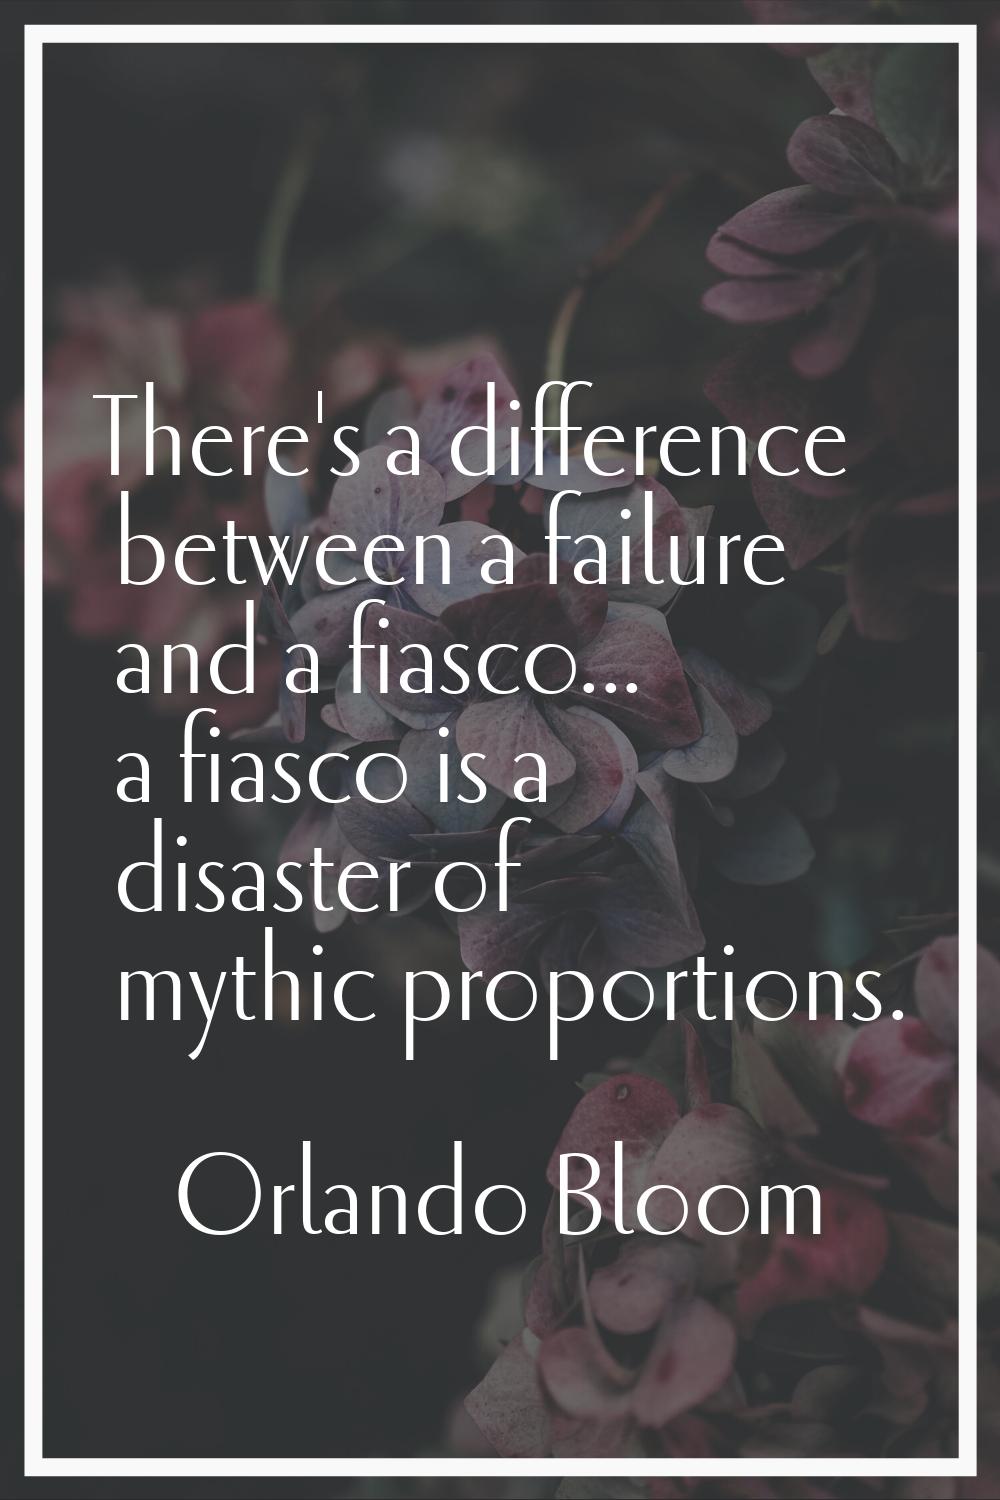 There's a difference between a failure and a fiasco... a fiasco is a disaster of mythic proportions